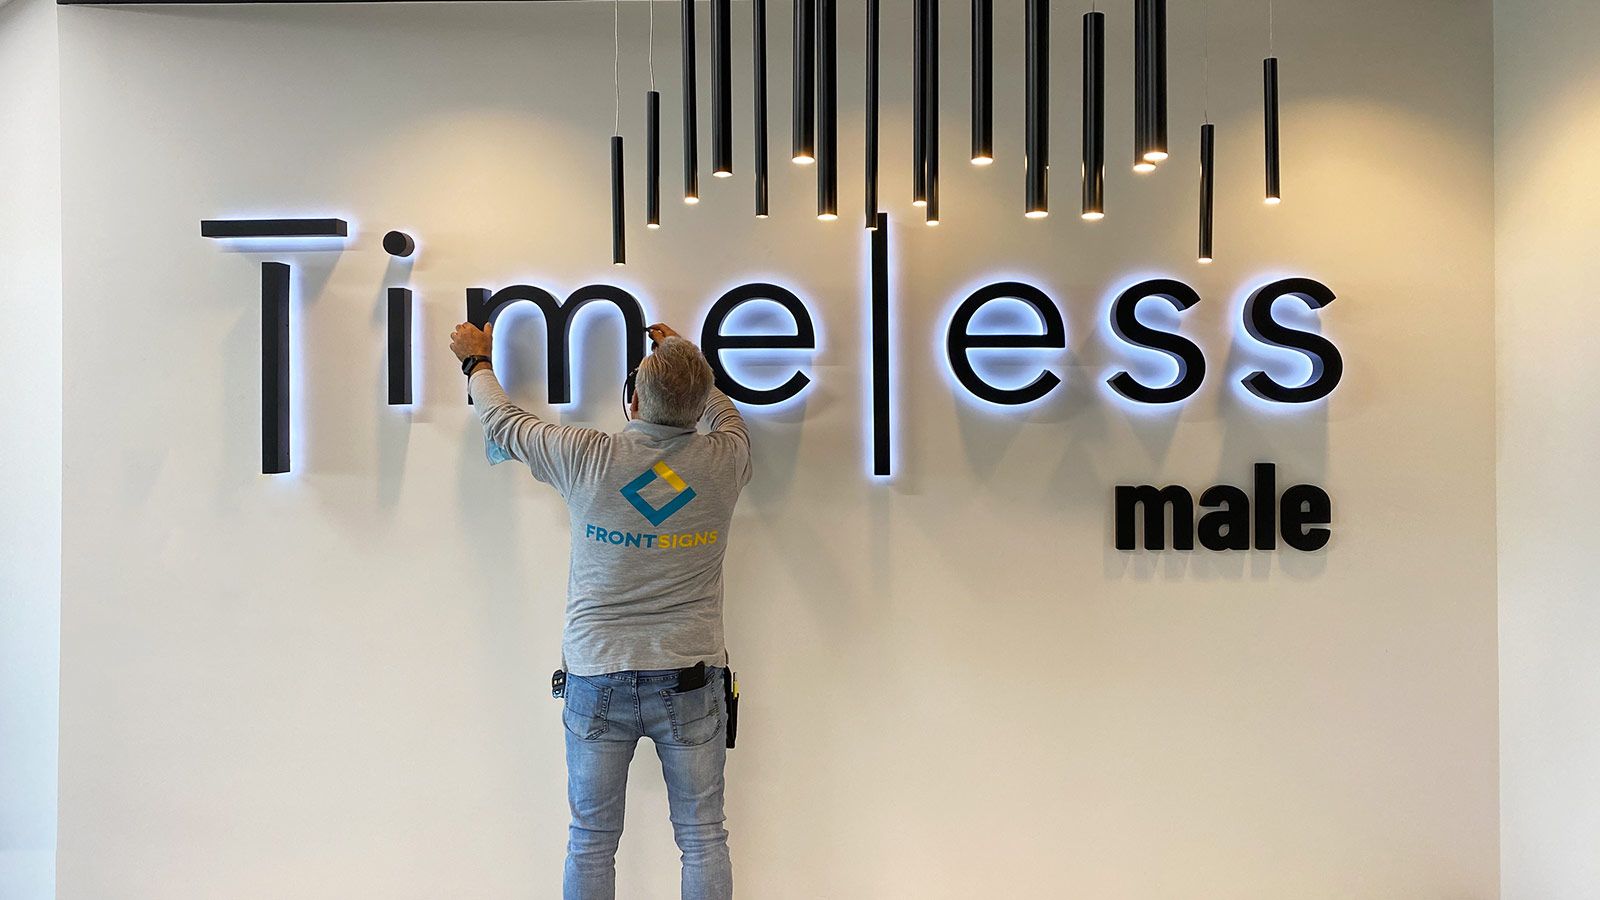 timeless male led sign installation